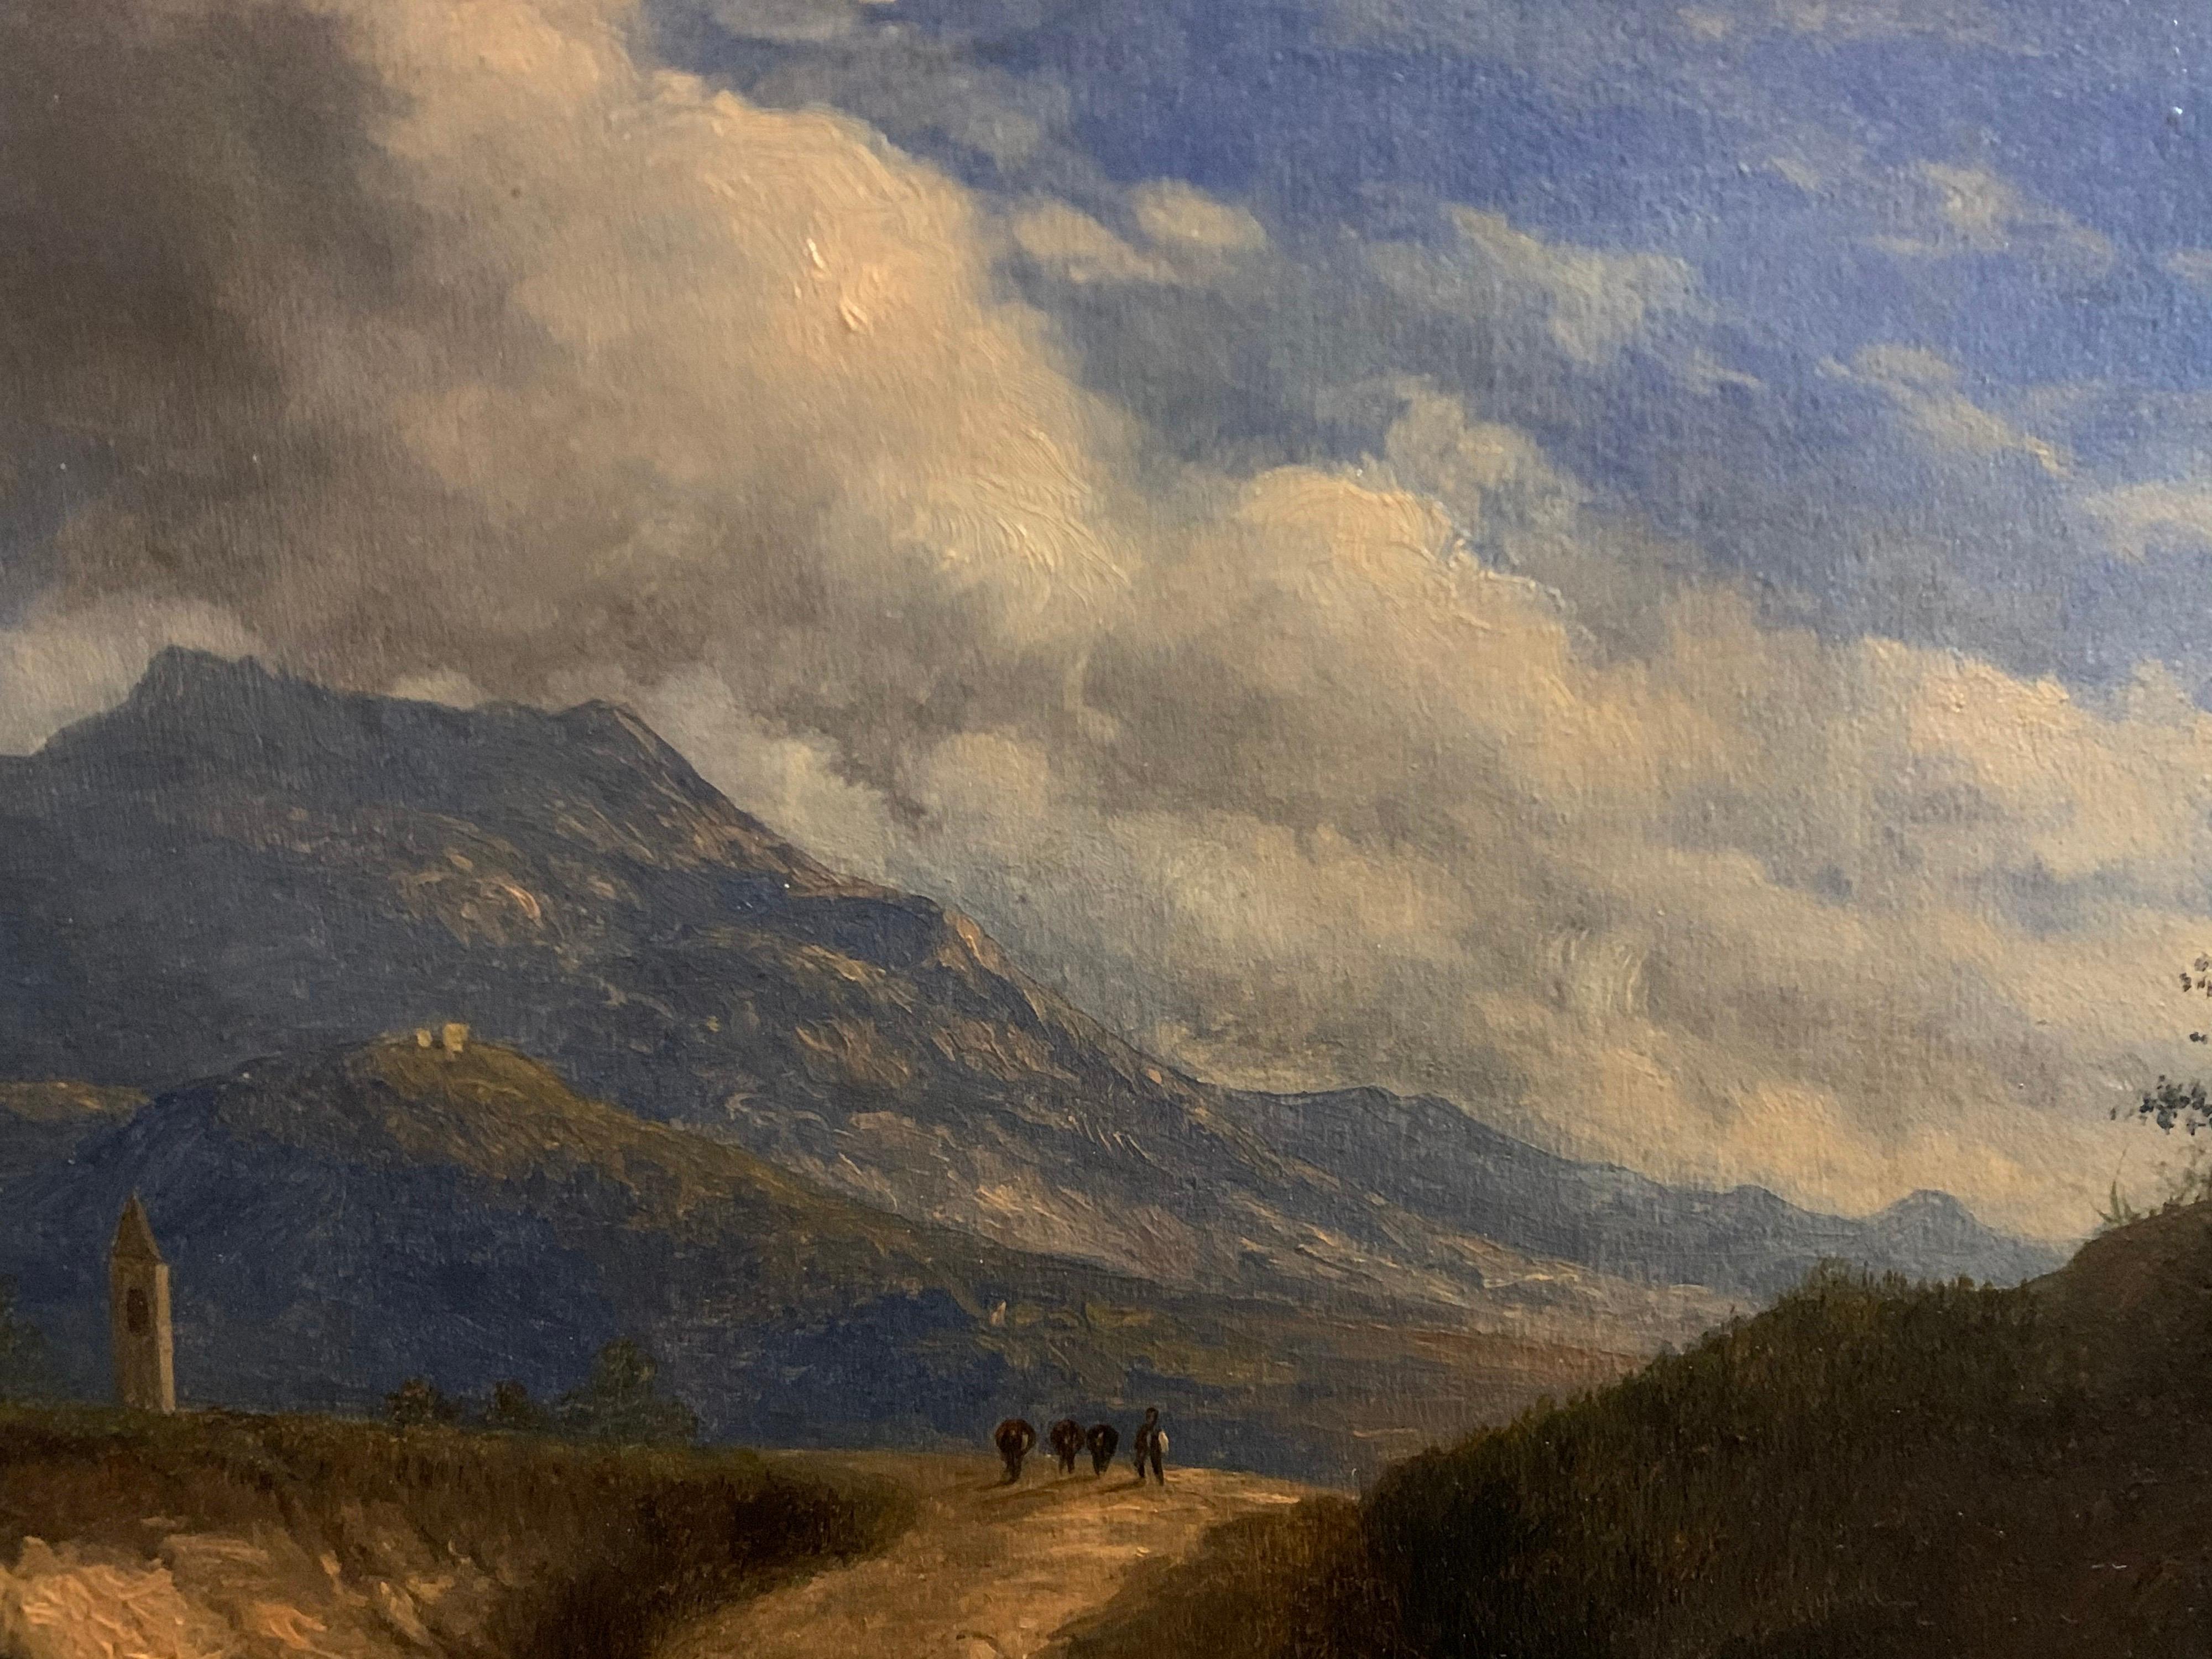 Early 19th Century Italian Mountain Pass Landscape Travellers on Journey. Oil  - Black Landscape Painting by Italian antique